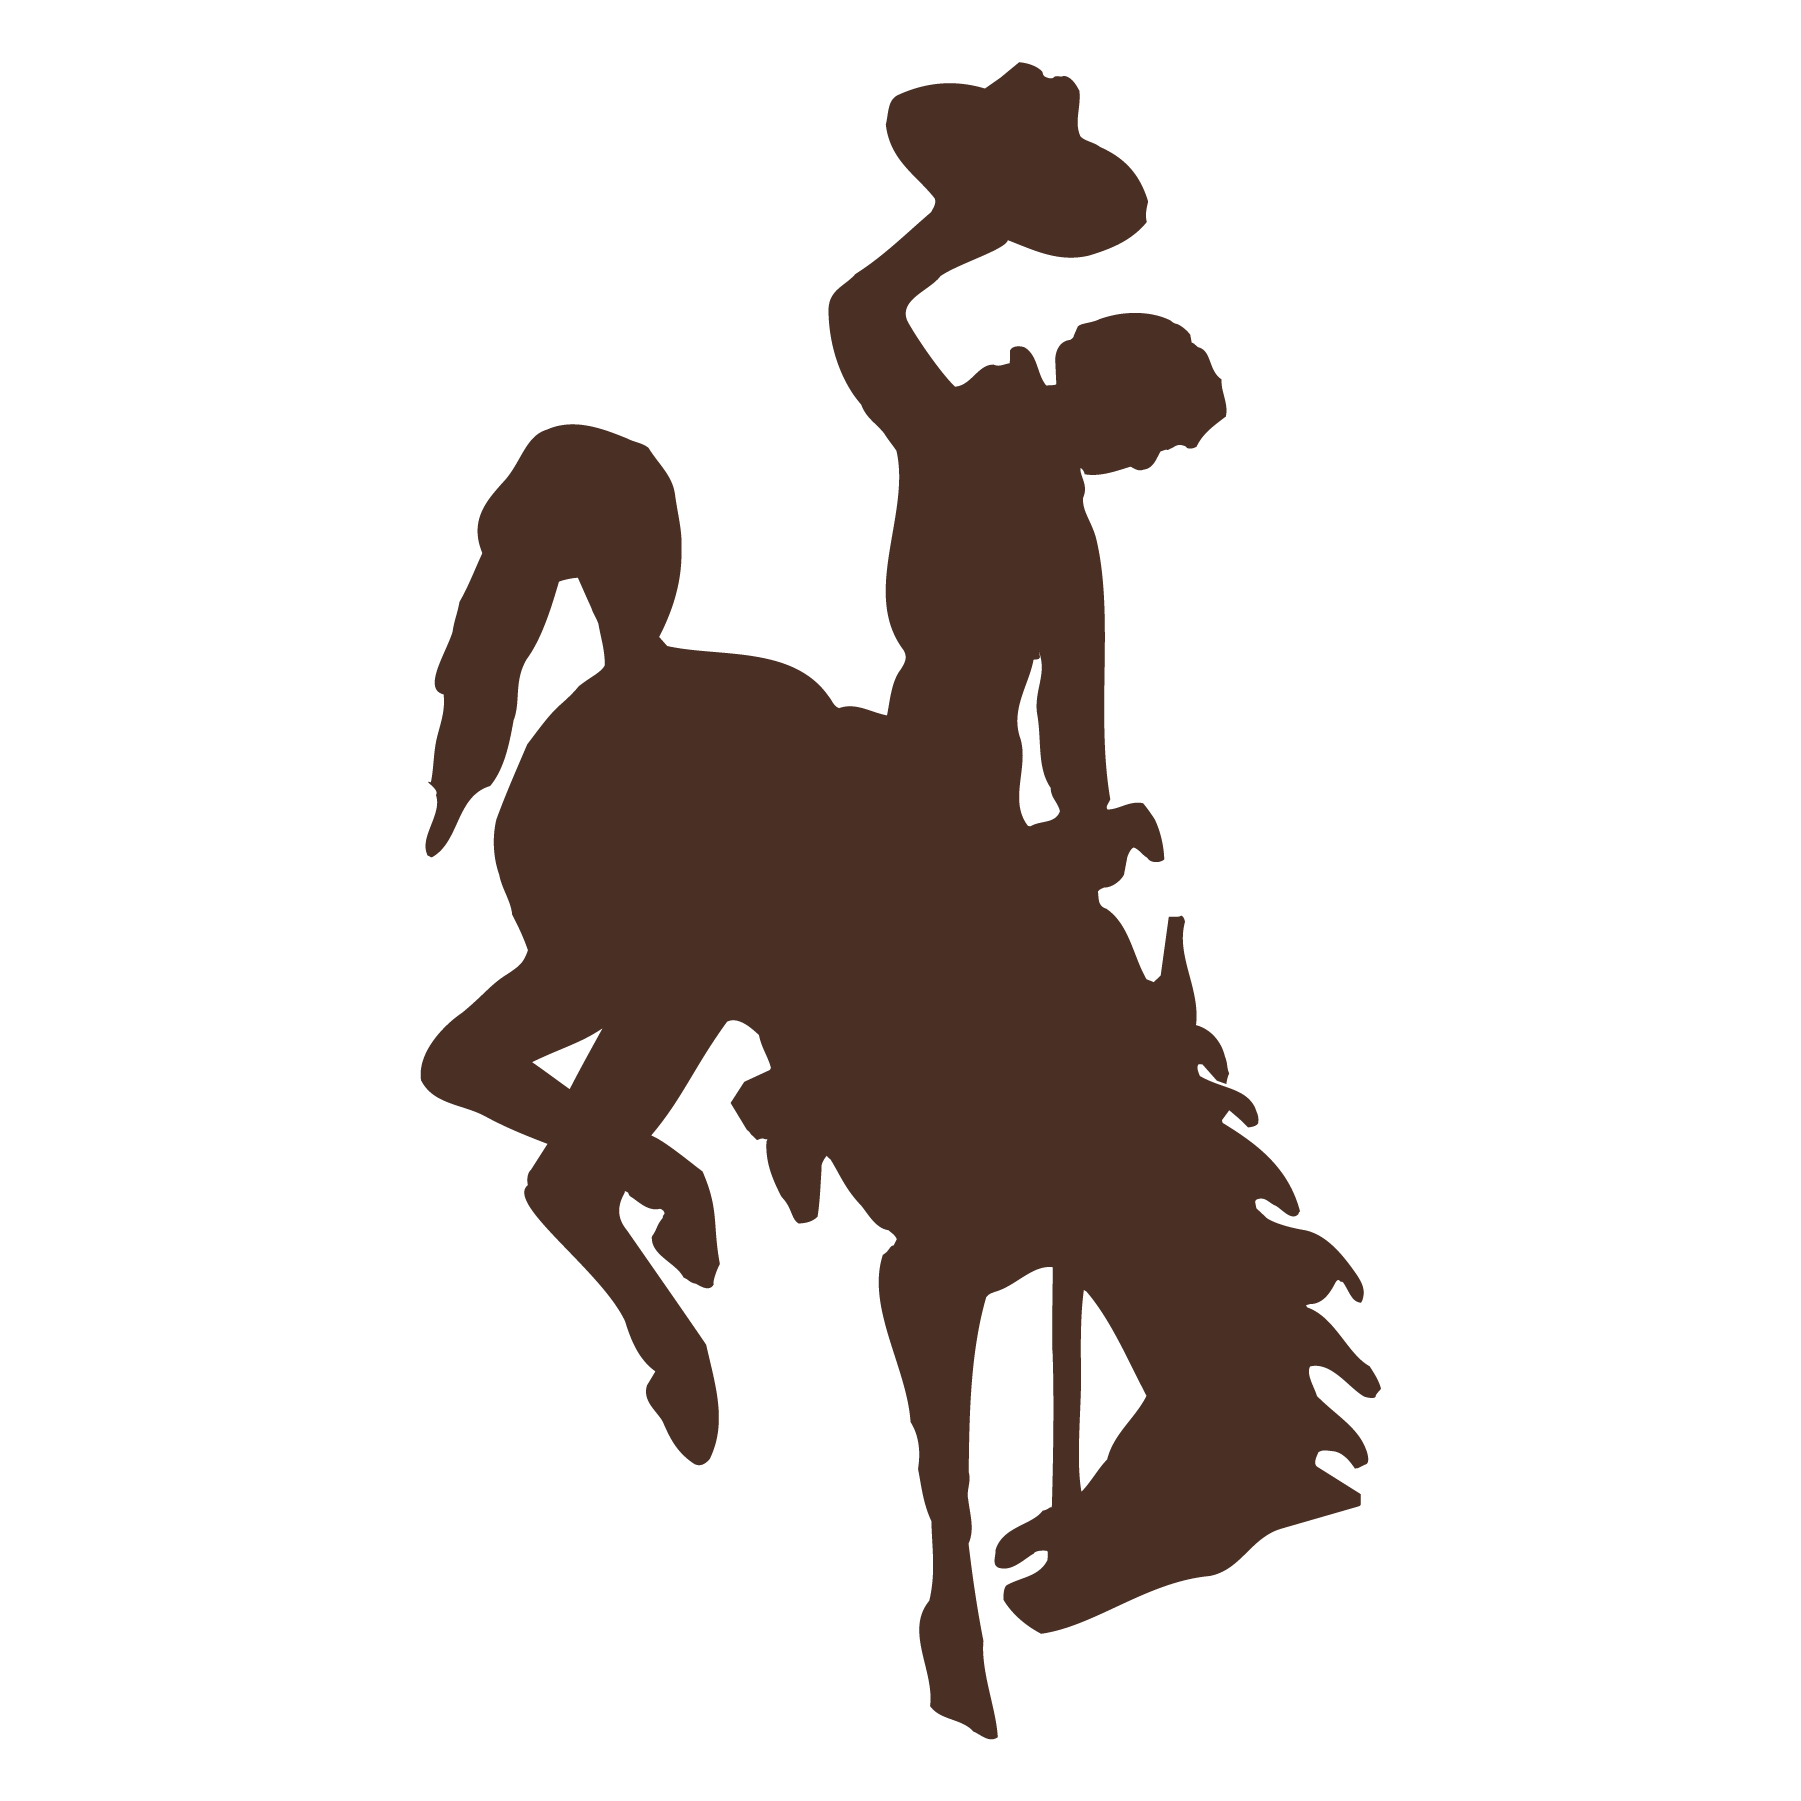 Bucking horse and rider icon